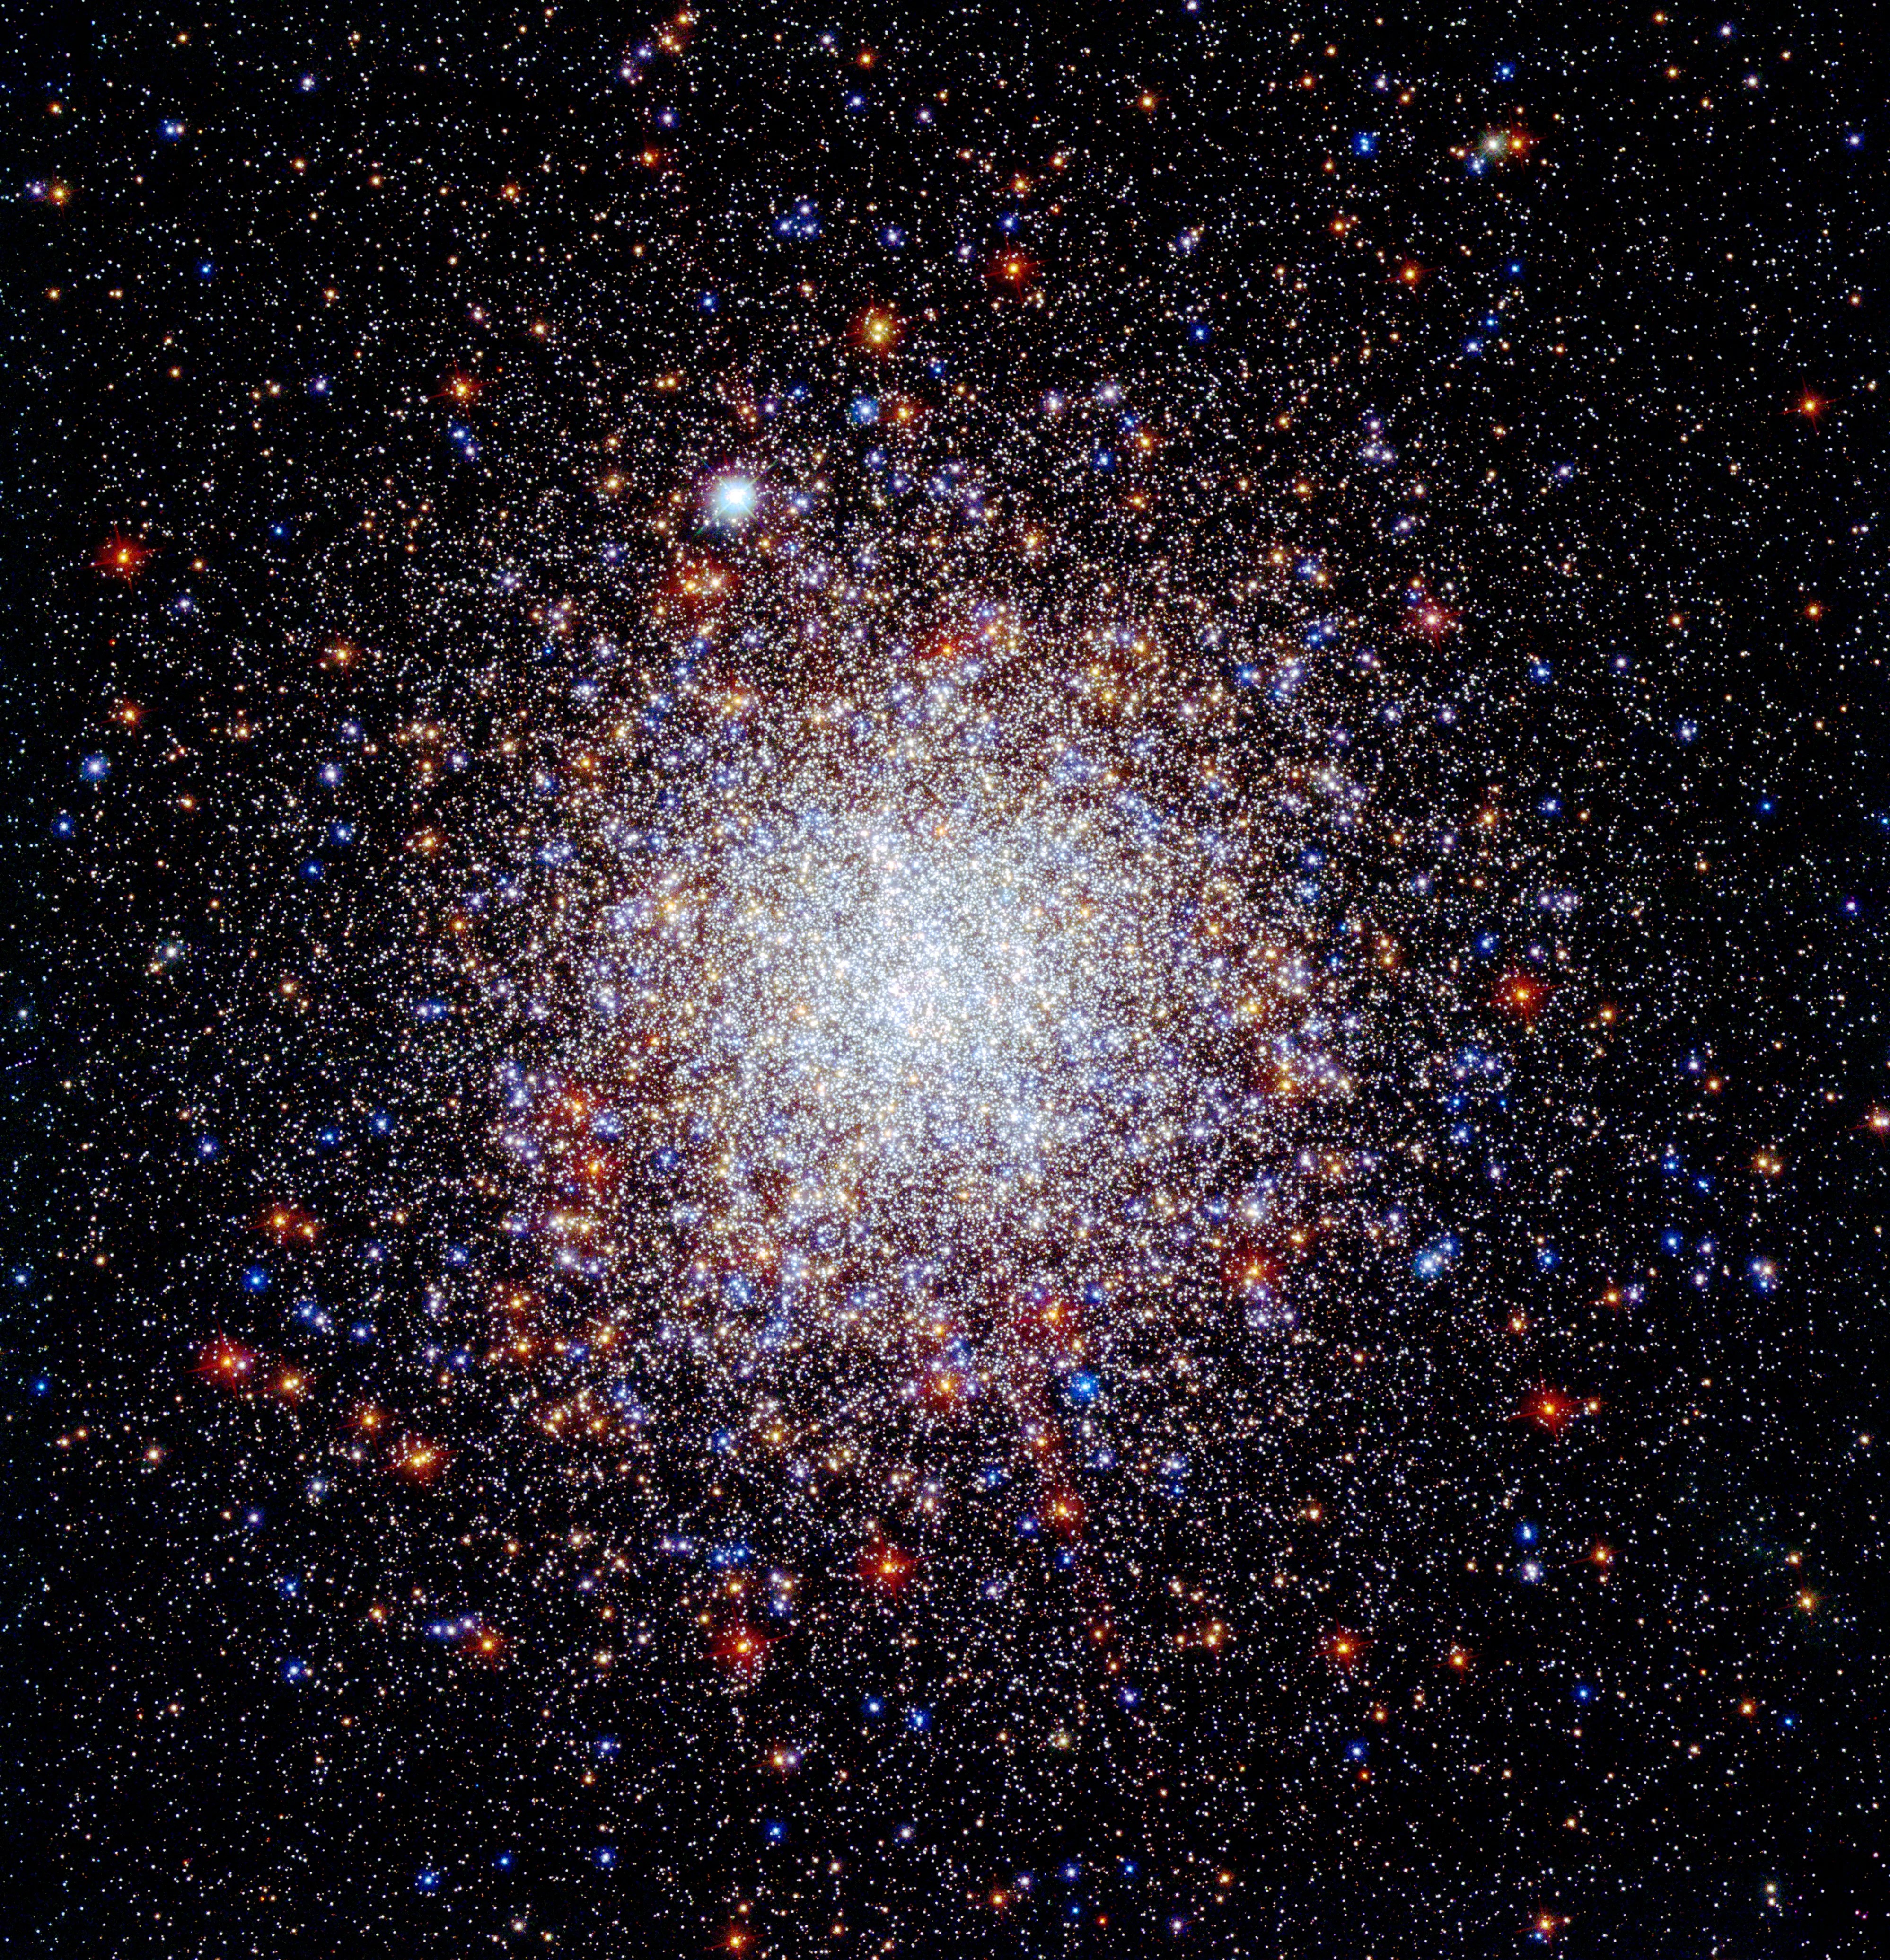 This image features the nearly spherical globular star cluster Caldwell 84.